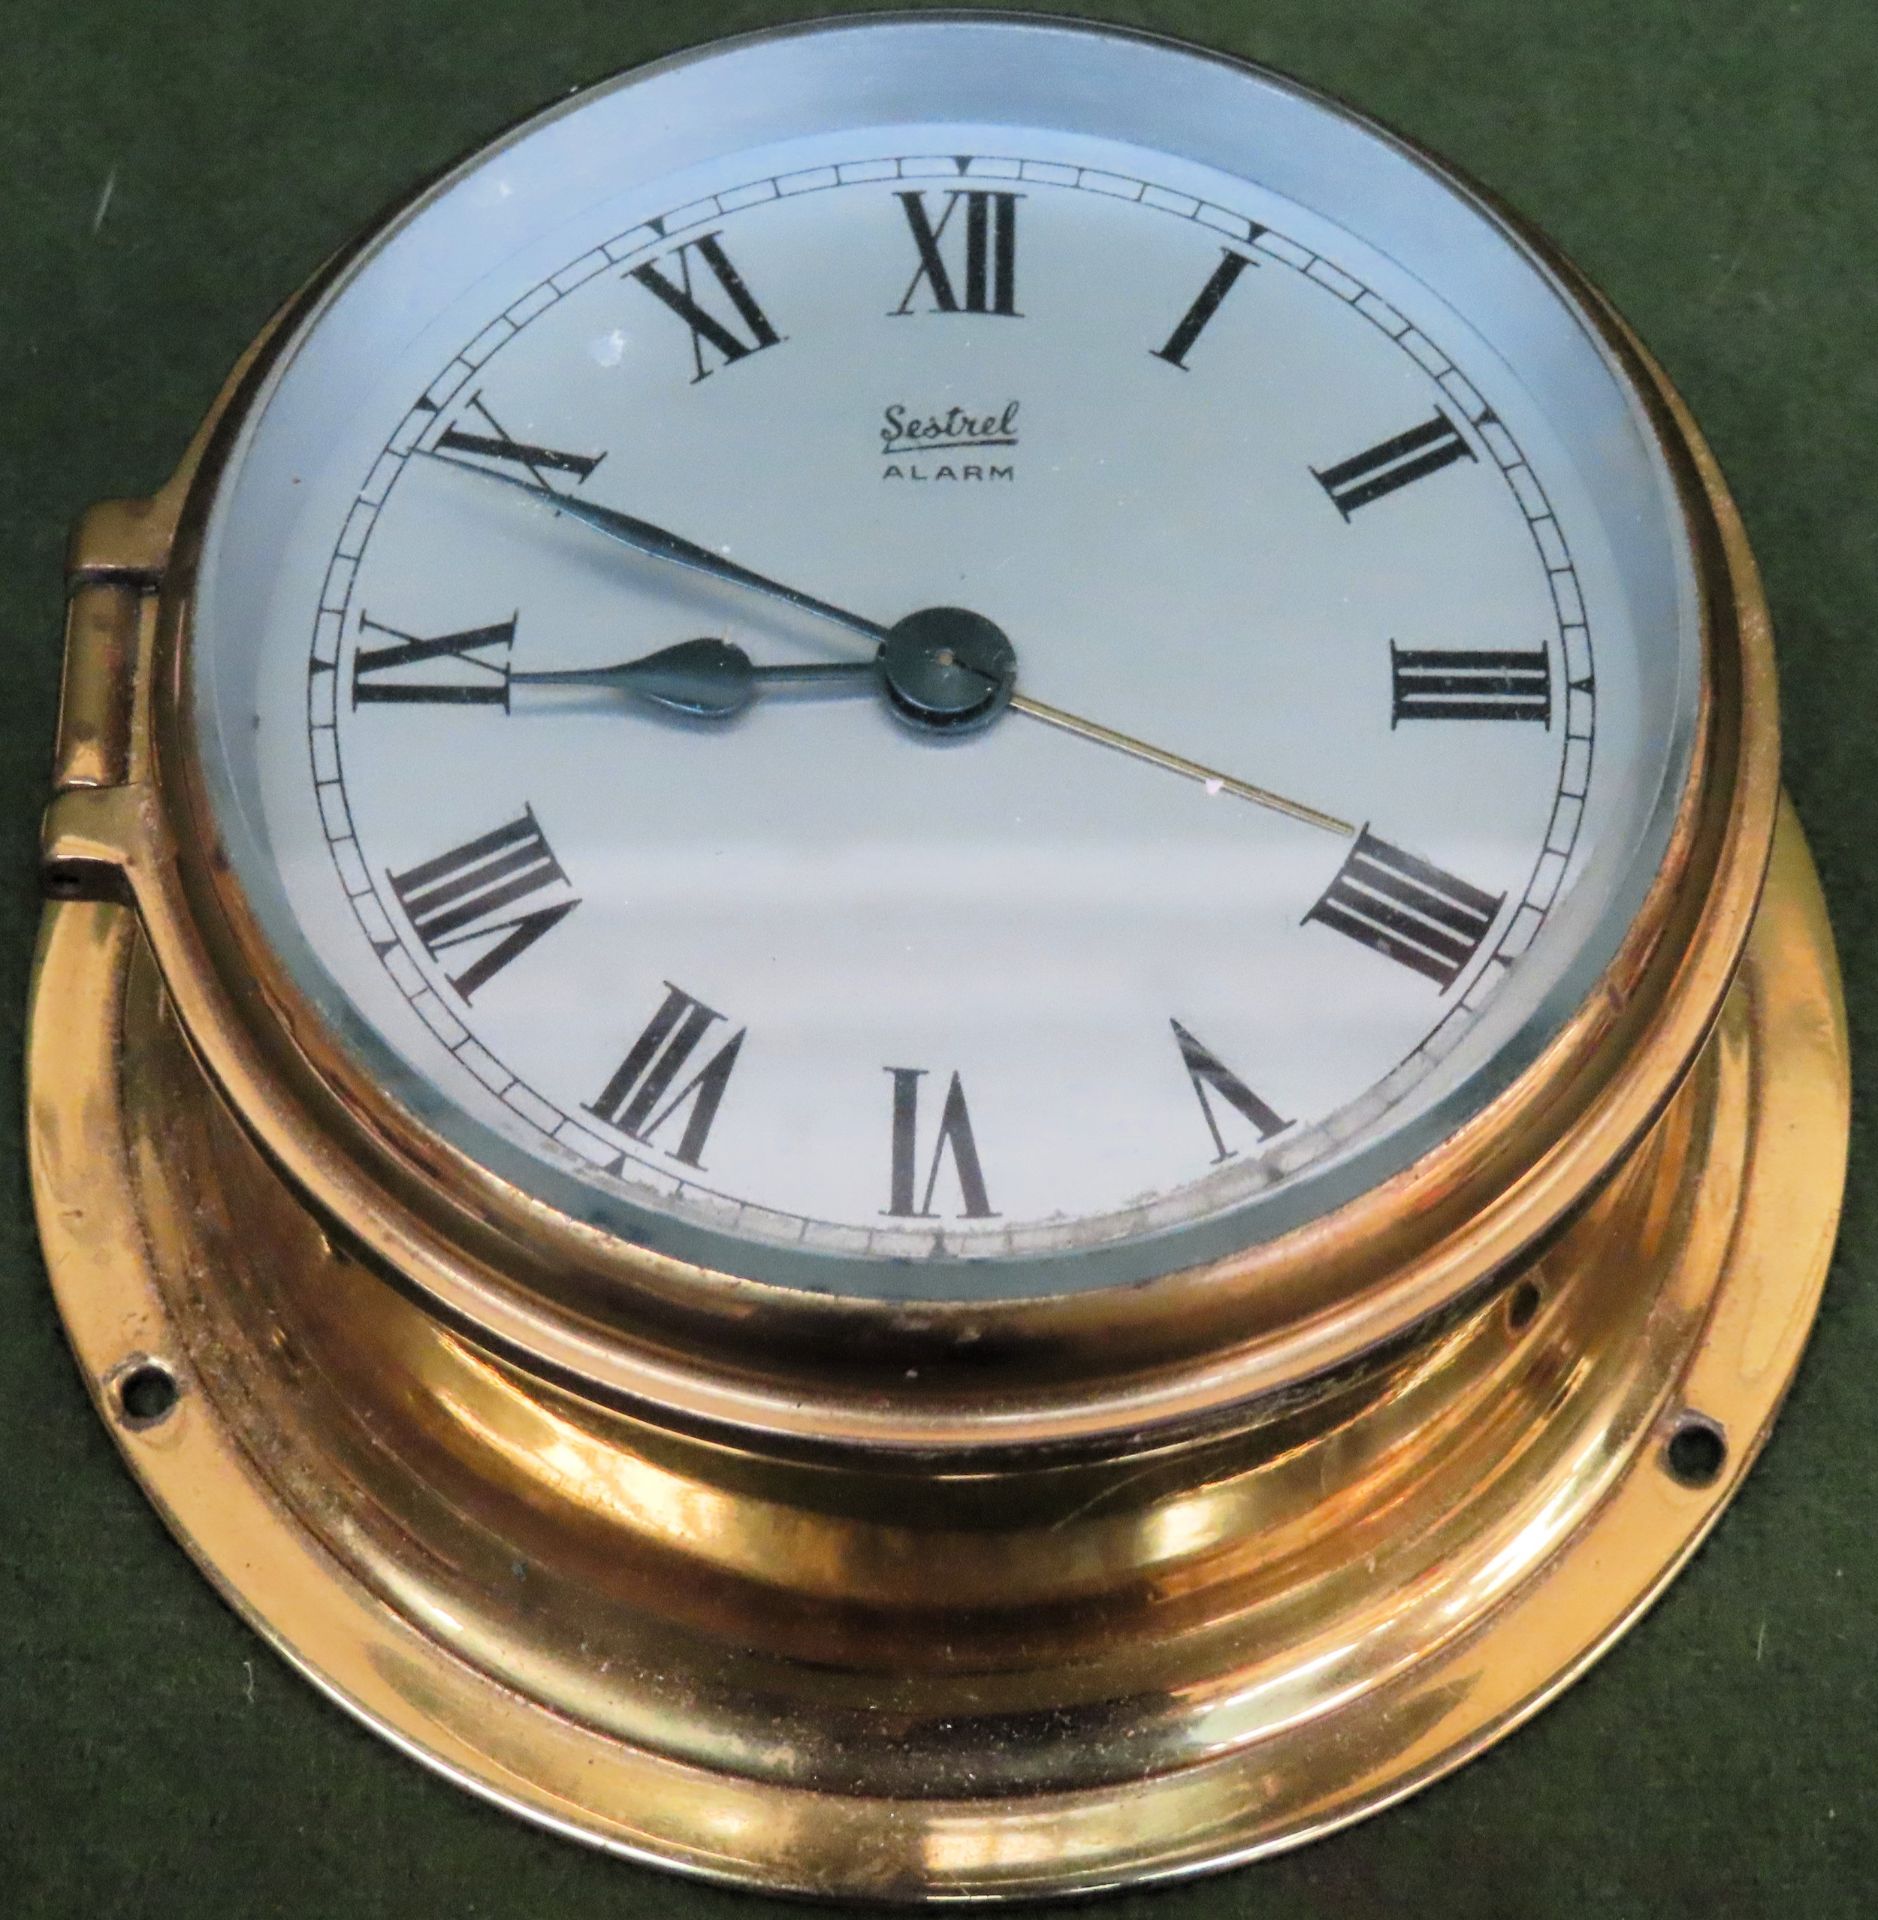 Vintage wooden cased brass farenheit's thermometer/barometer, plus 20th century sextral alarm clock - Image 2 of 2